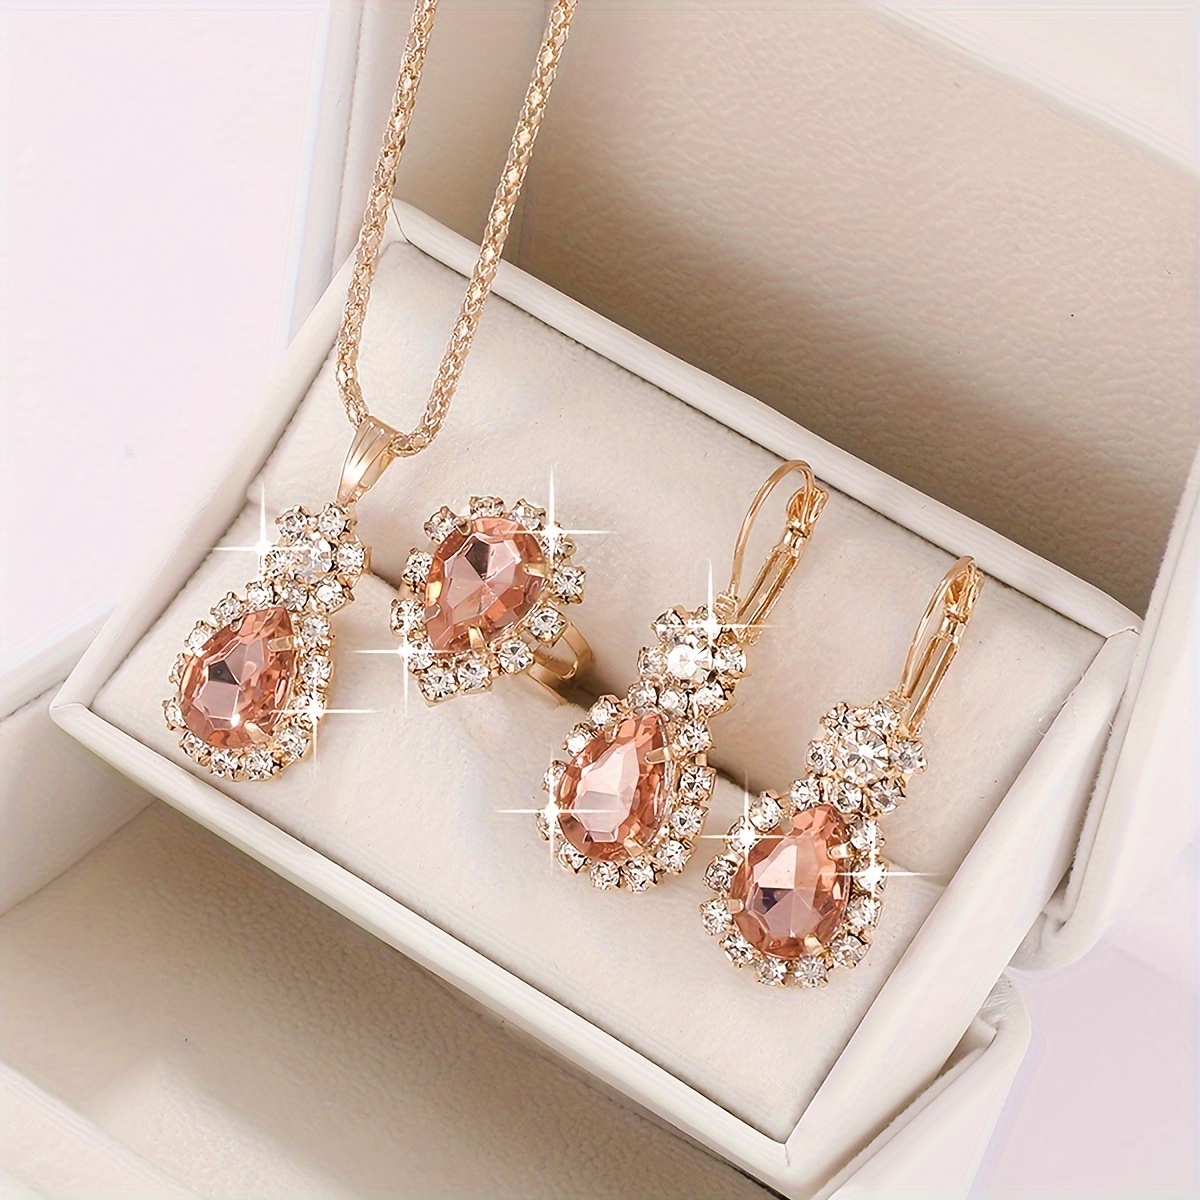 

Elegant 4pcs Women's Fashion Teardrop Jewelry Set, Necklace & Earrings, Crystal Embellished, Rose Golden/ruby Color Options, Gift Box Included For Special Occasions